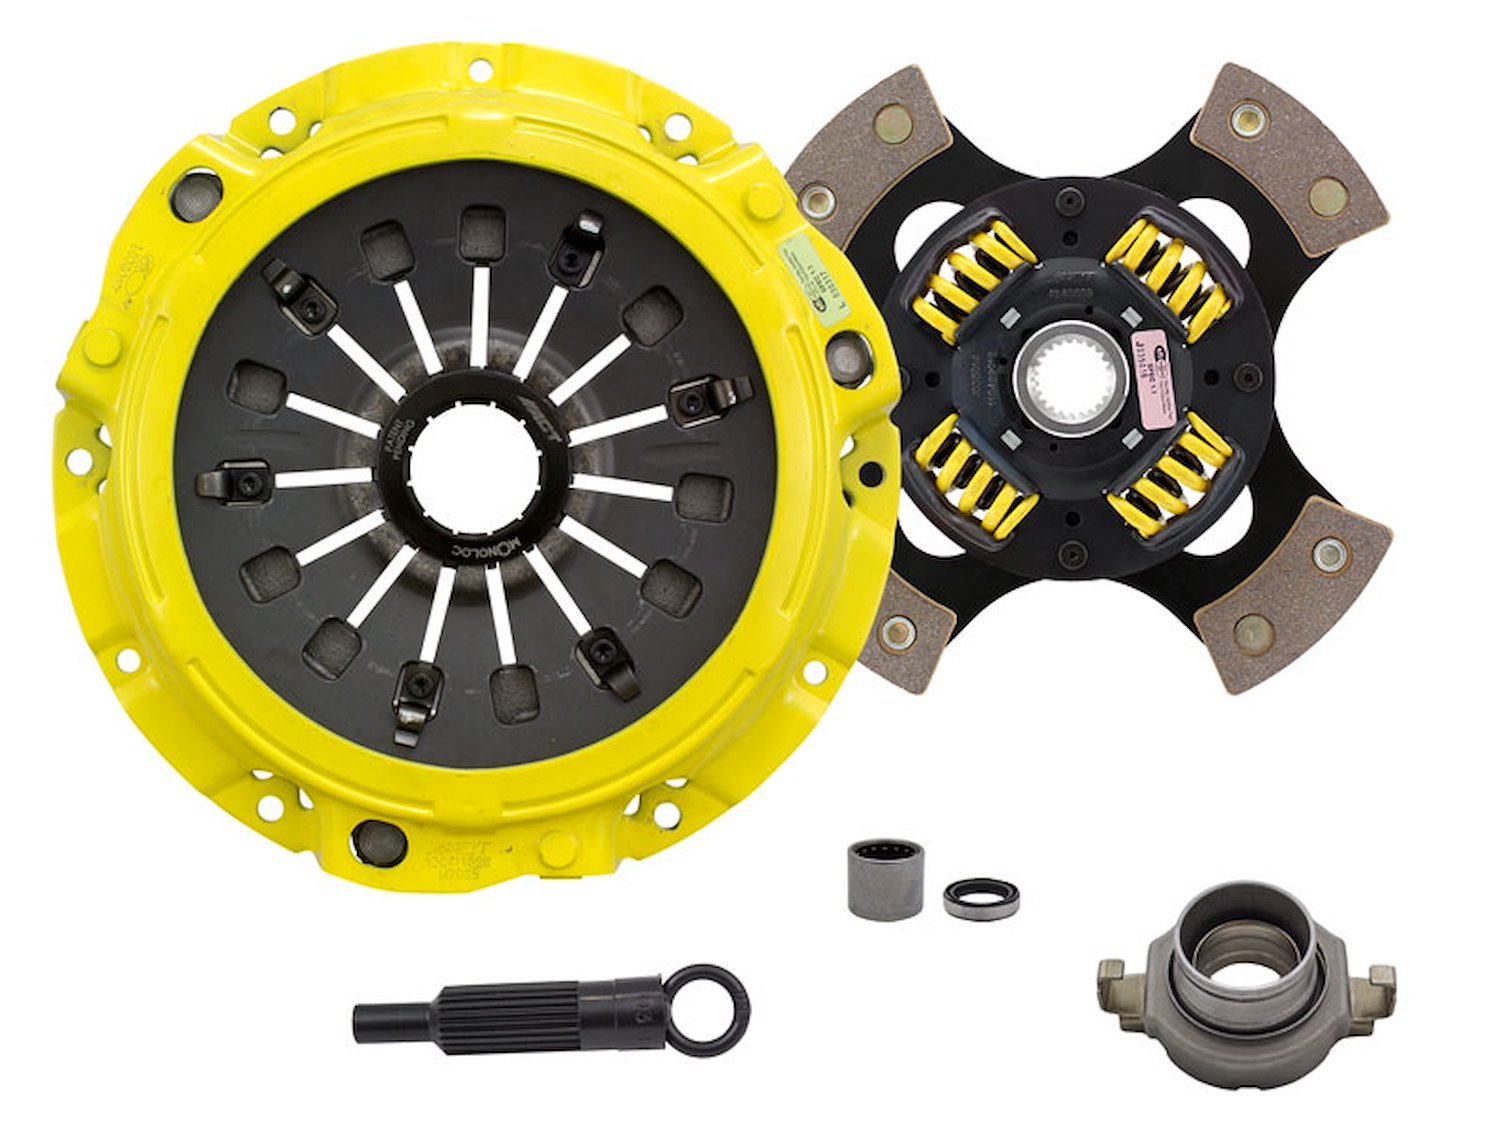 HD-M/Race Sprung 4-Pad Transmission Clutch Kit Fits Select Ford/Lincoln/Mercury/Mazda